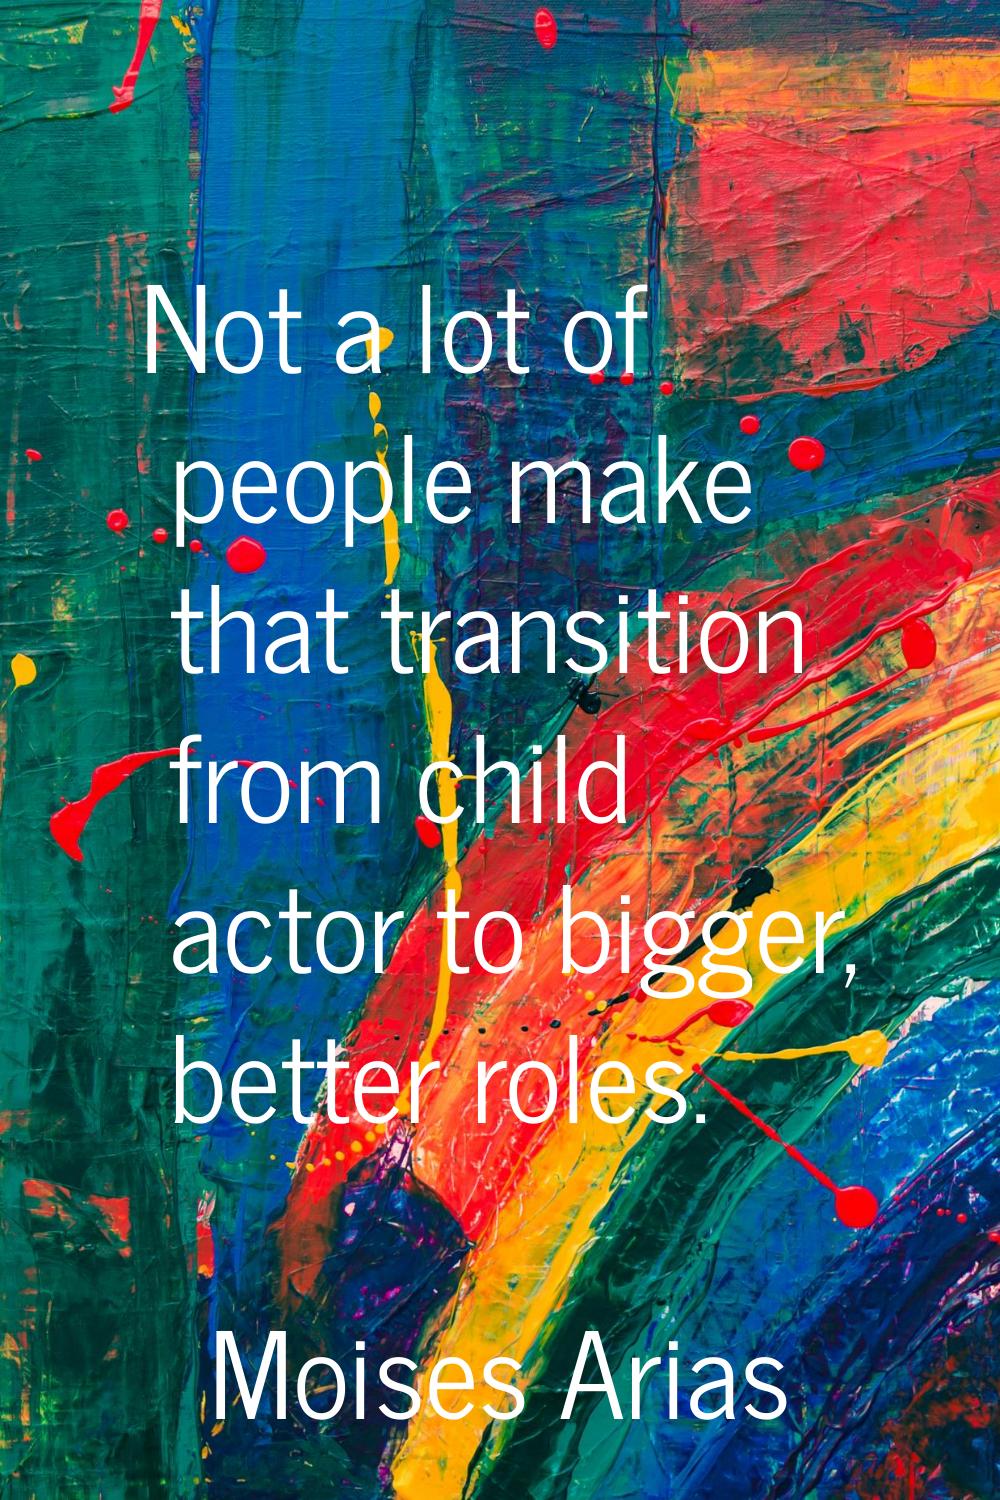 Not a lot of people make that transition from child actor to bigger, better roles.